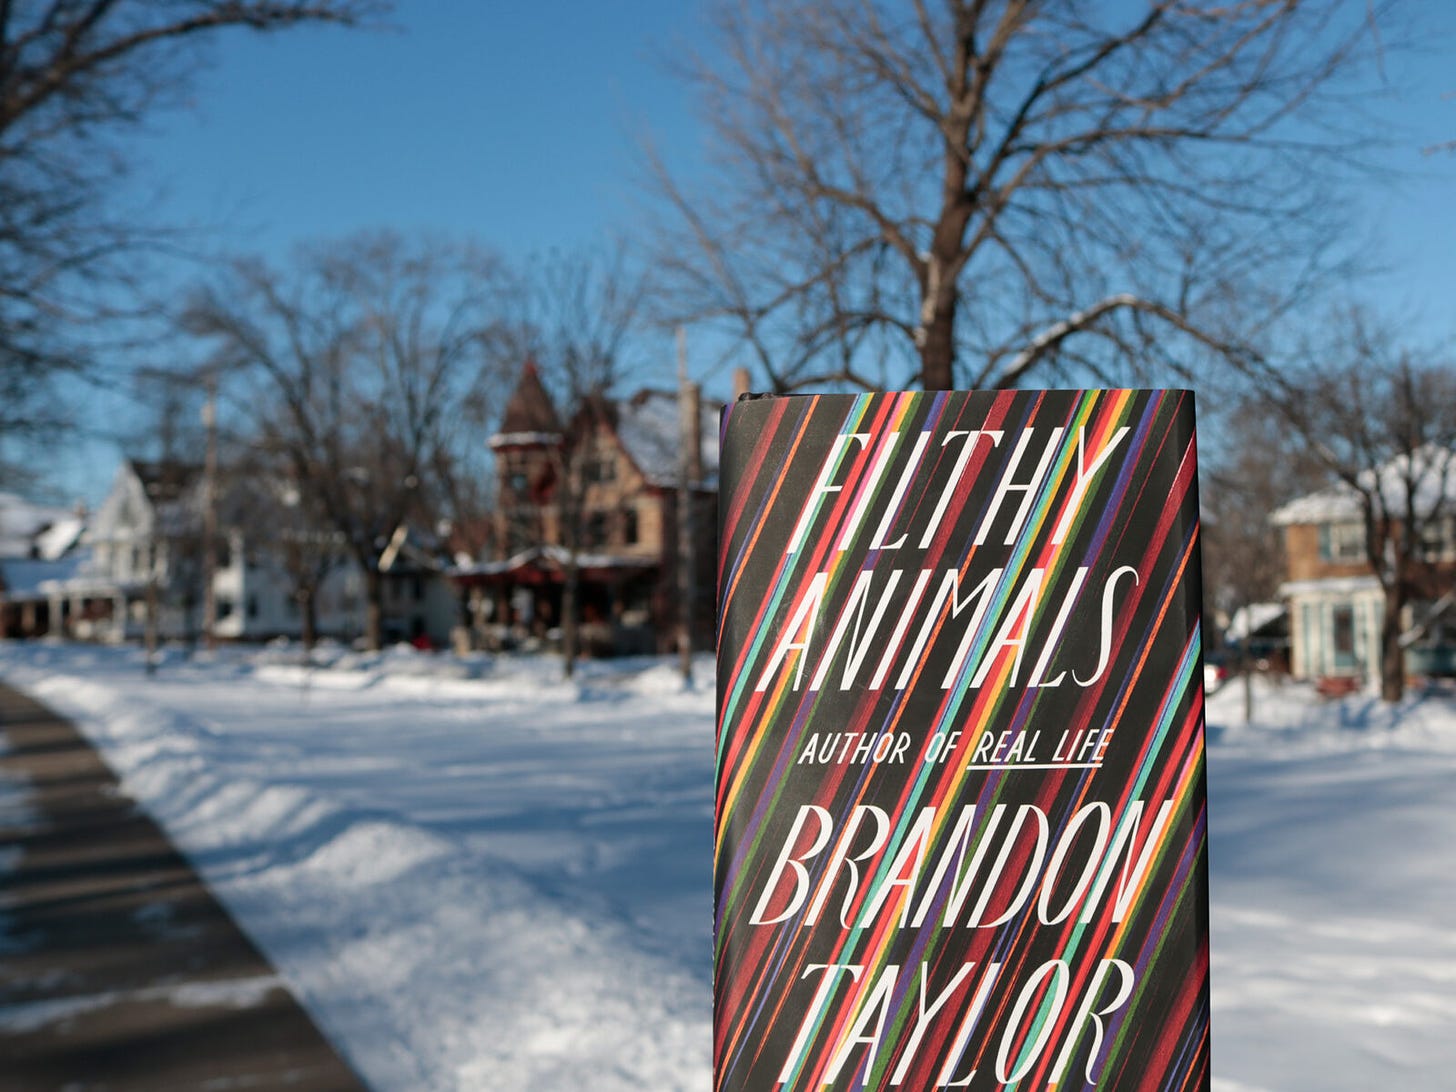 A hardcover copy of the book Filthy Animals by Brandon Taylor, featuring diagonal multicolored stripes across a black background and the title and author in italic capital letters, is shown in a photo with a snowy morning in Madison’s Orton Park in the background. Houses, bare trees, a blue sky, and a stretch of park path are visible in the photo's background.